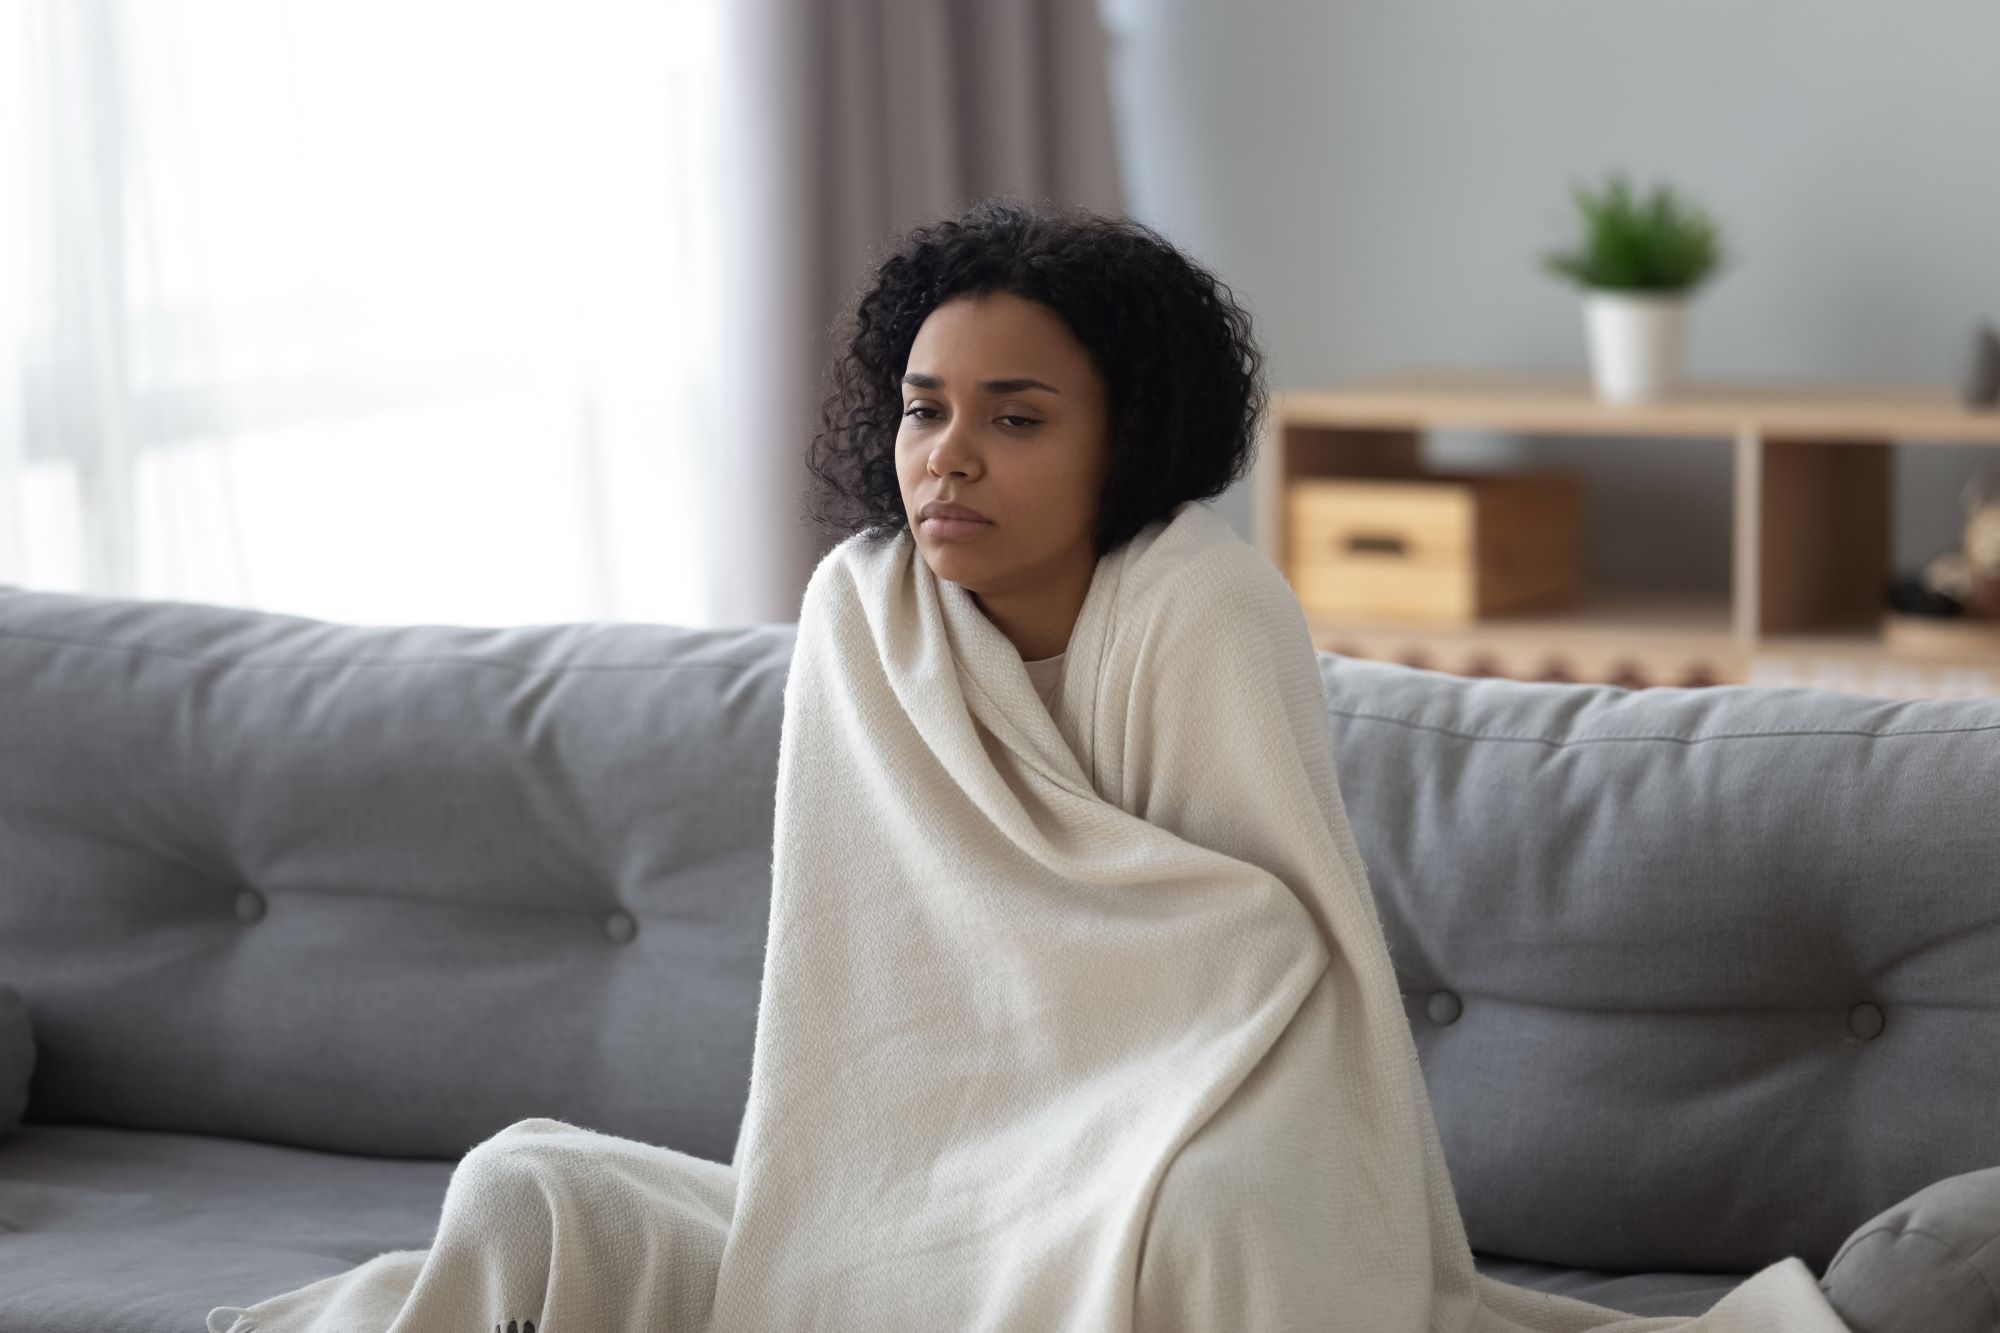 Photo of sick woman sitting on sofa while covered in a blanket.